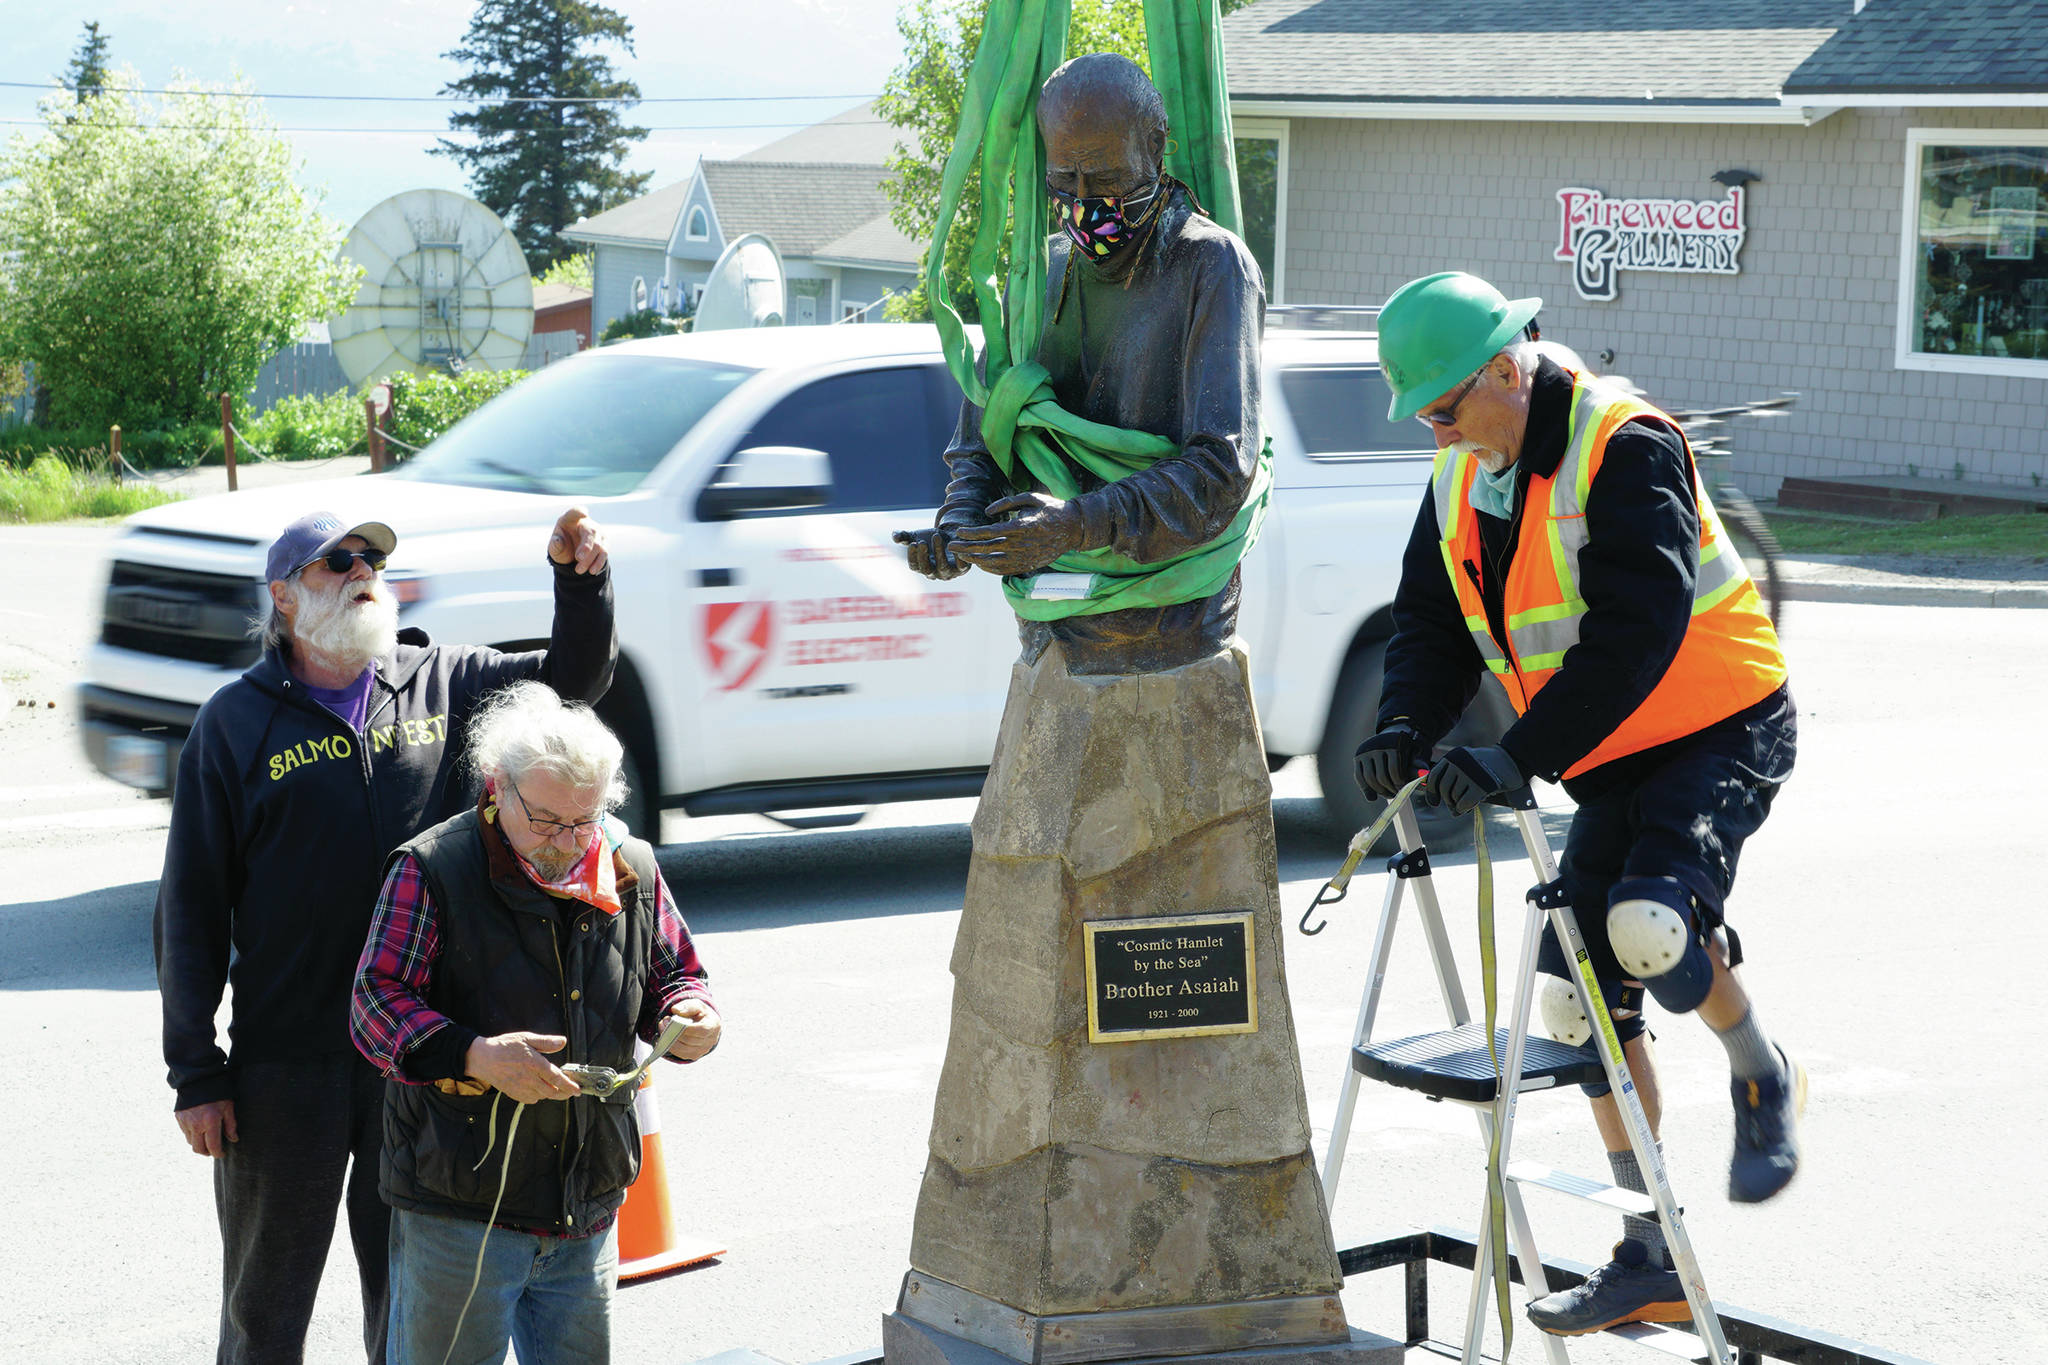 Mike Kennedy, left, Leo Vait, center, and Wayne Aderhold, right, strap the Brother Asaiah statue on a trailer after it was moved from the deck of Cosmic Kitchen on Saturday, June 6, 2020, in Homer, Alaska. Vait created the statue as a commission by John Nazarian, a friend of Asaiah Bates. Nazarian had loaned to the Pioneer Avenue restaurant the statue of the man who coined the phrase “Cosmic Hamlet by the Sea” to describe Homer. The statue was moved after Cosmic Kitchen owners Michelle Wilson and Sean Hogan sold their restaurant. Cosmic Kitchen closed on Saturday. The Asaiah statue will be stored until a new location can be found. (Photo by Michael Armstrong/Homer News)